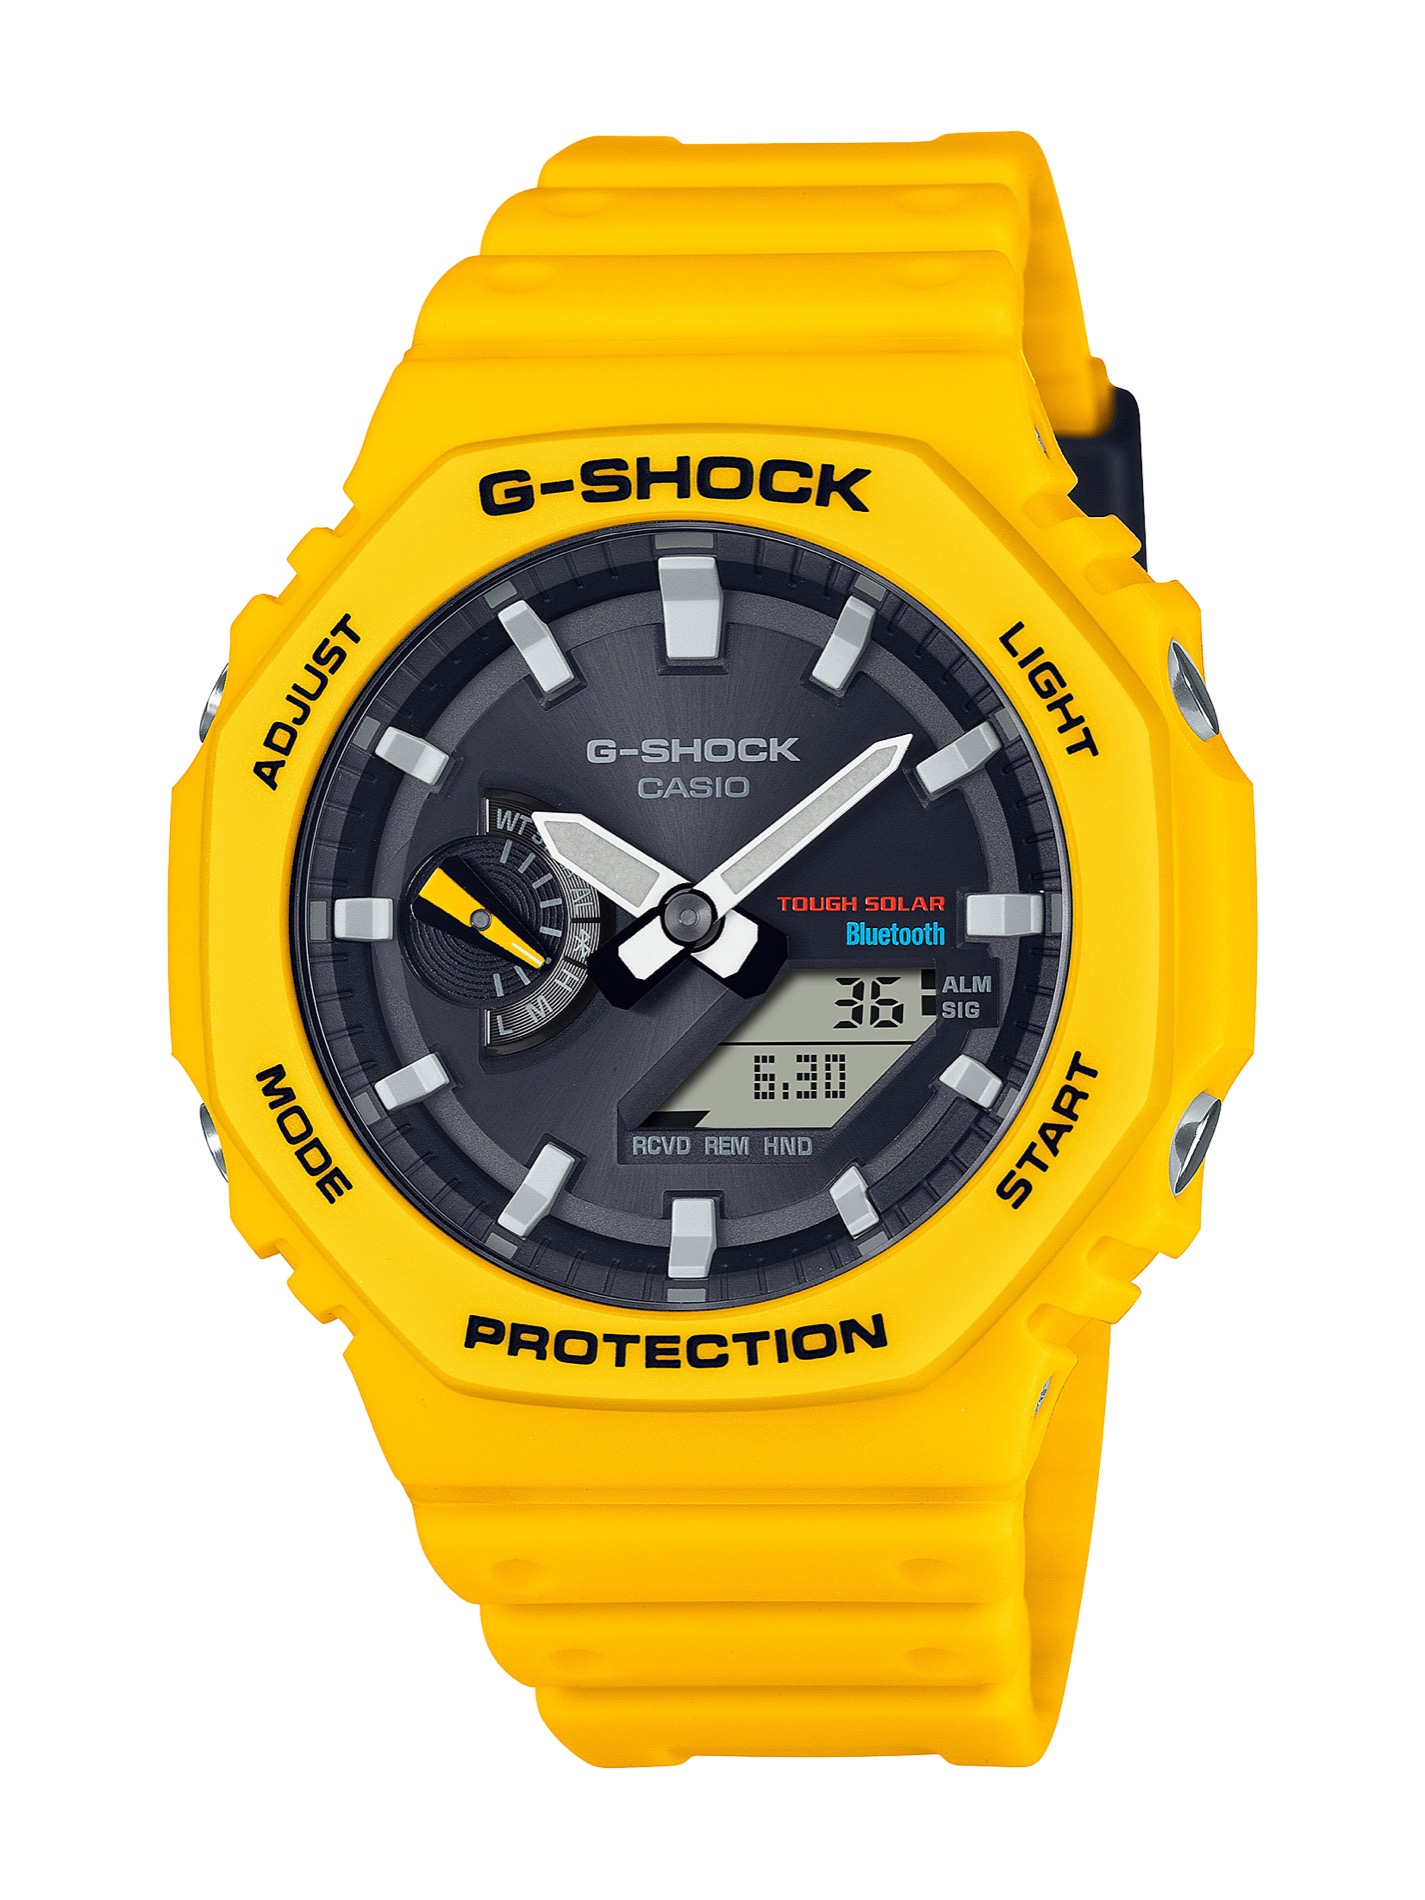 Recently Released: G-Shock GA-B2100 - WristWatchReview